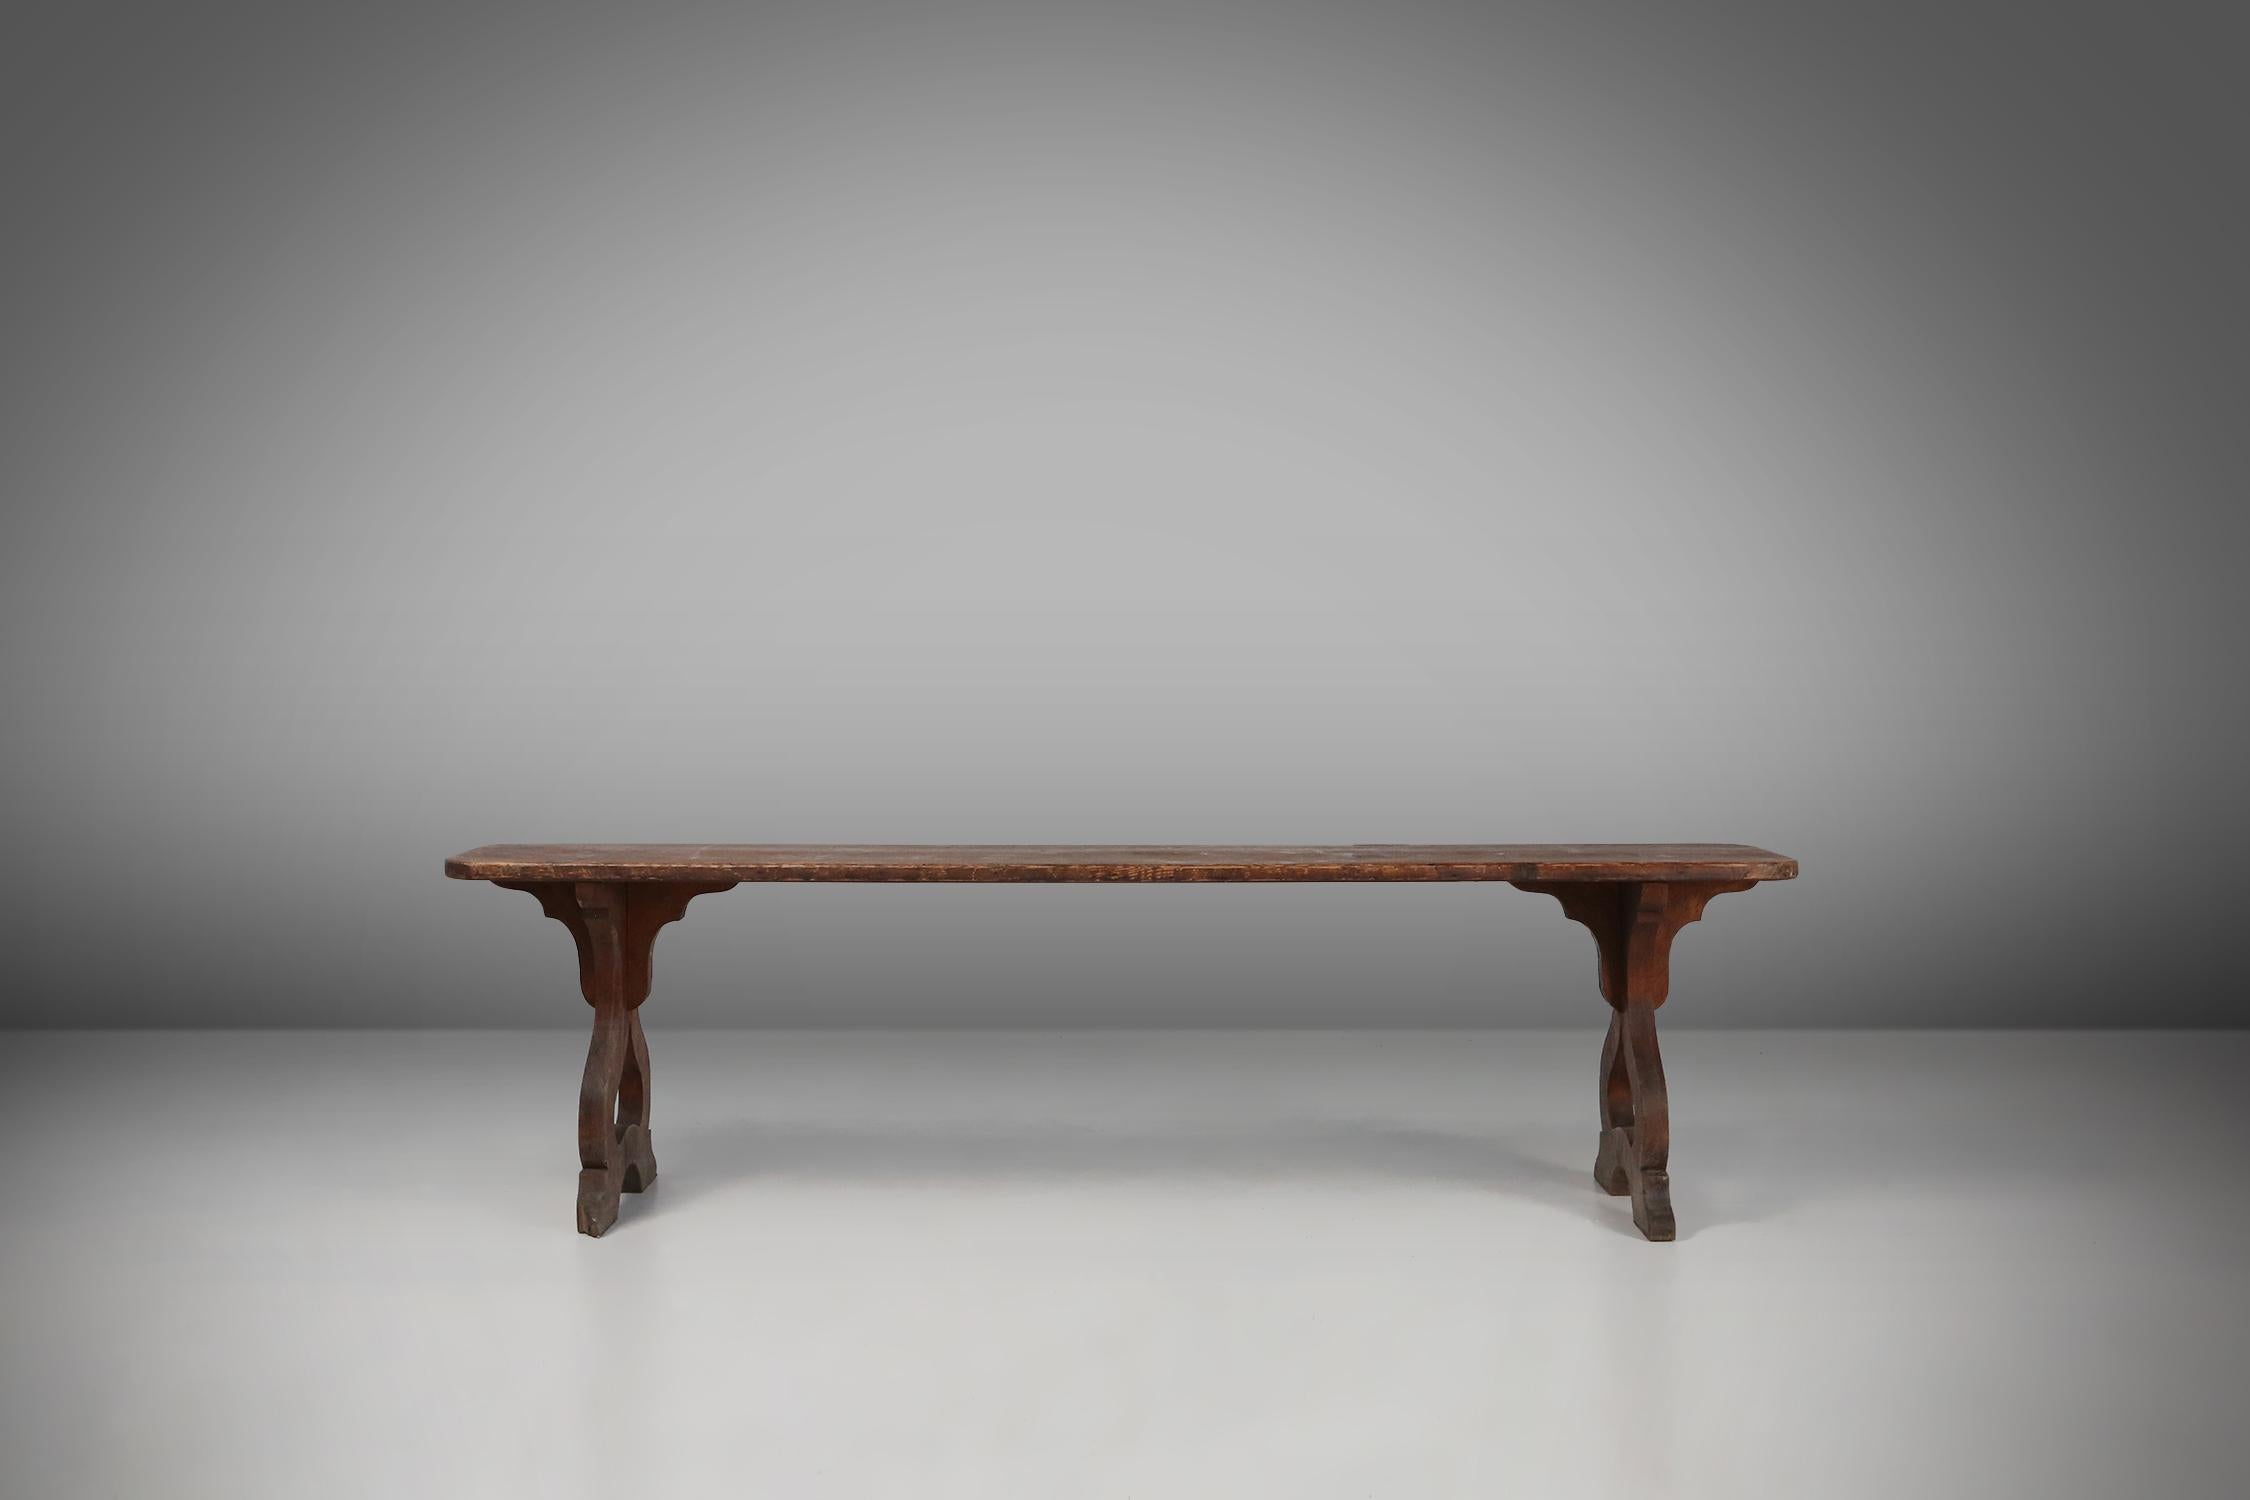 An interesting wooden bench, with decorative elegant carved base and rounded wooden top with brilliant grain. This bench is meticulously handcrafted using the finest quality wood, ensuring durability and longevity. Its compact size makes it perfect